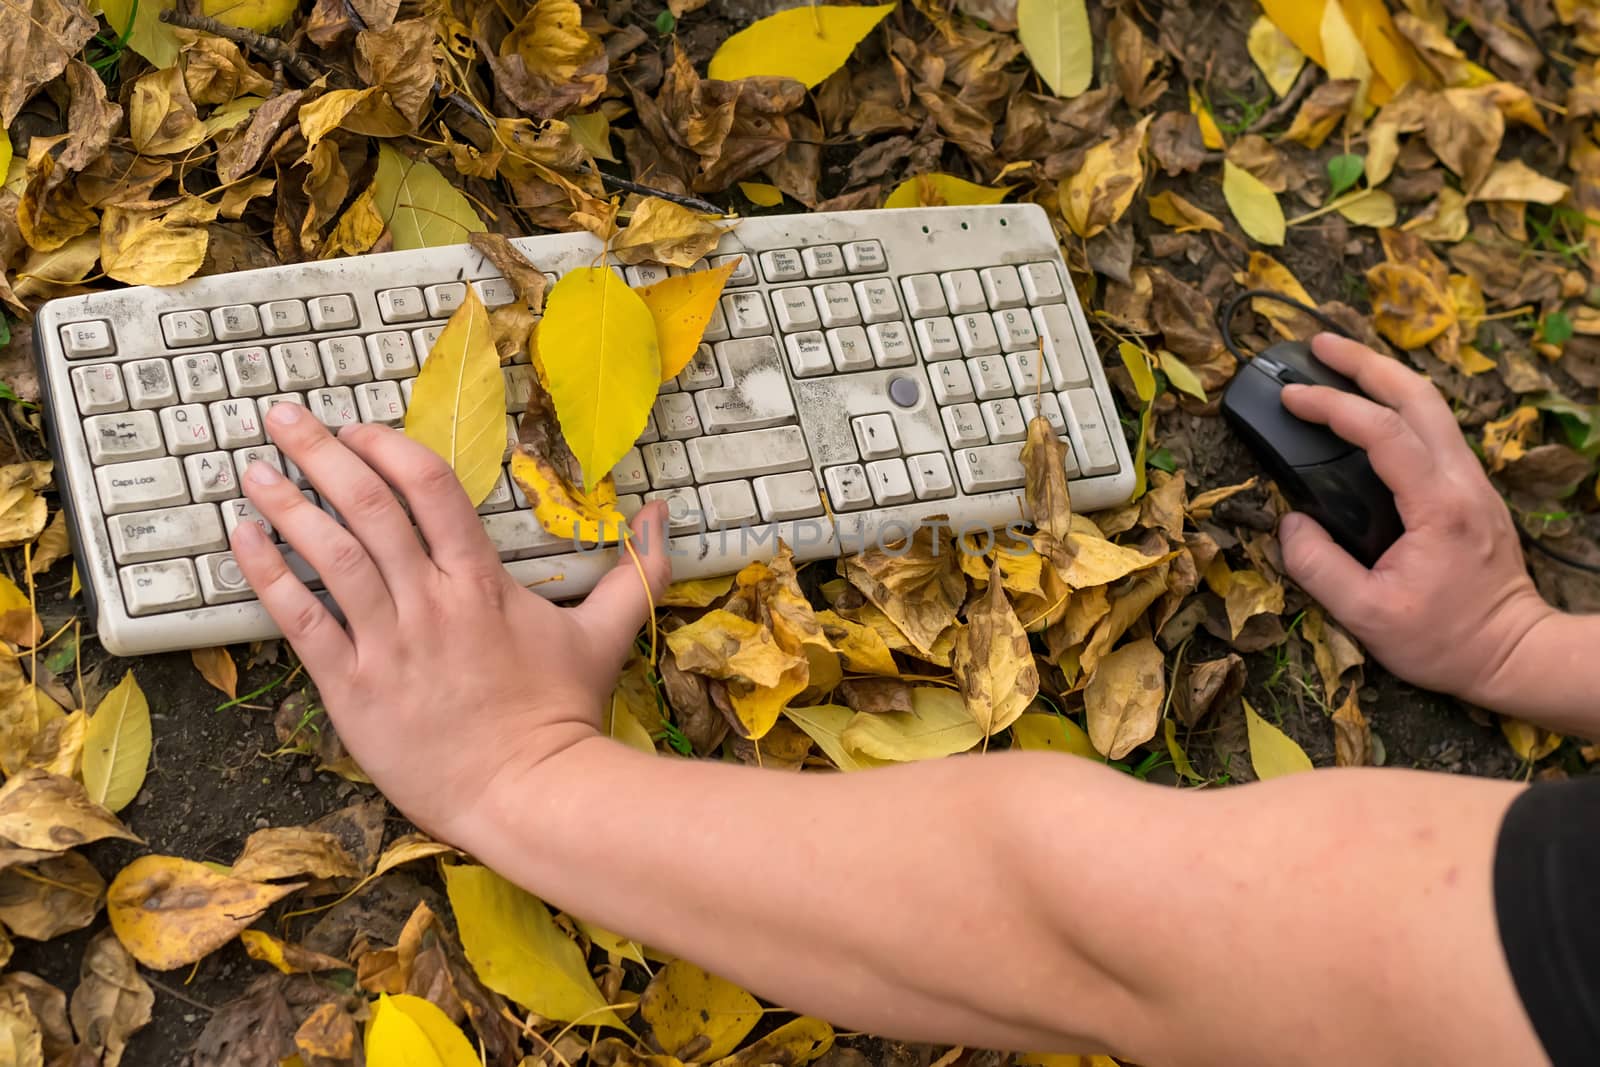 Autumn, a man working at a computer on a fallen yellow foliage in the city on the street